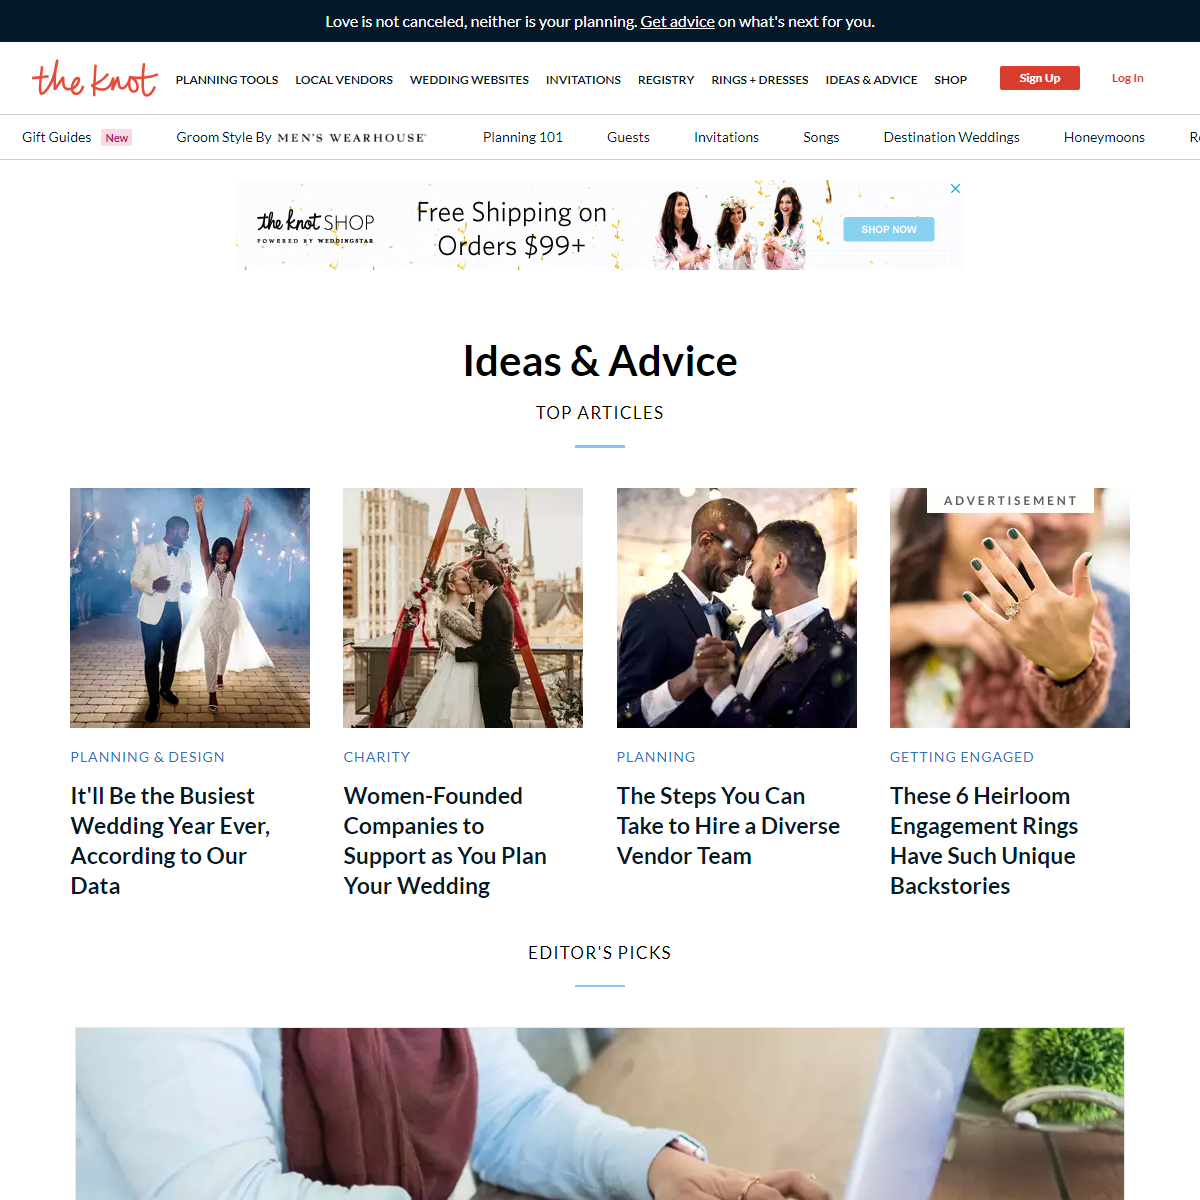 A complete backup of https://www.theknot.com/content